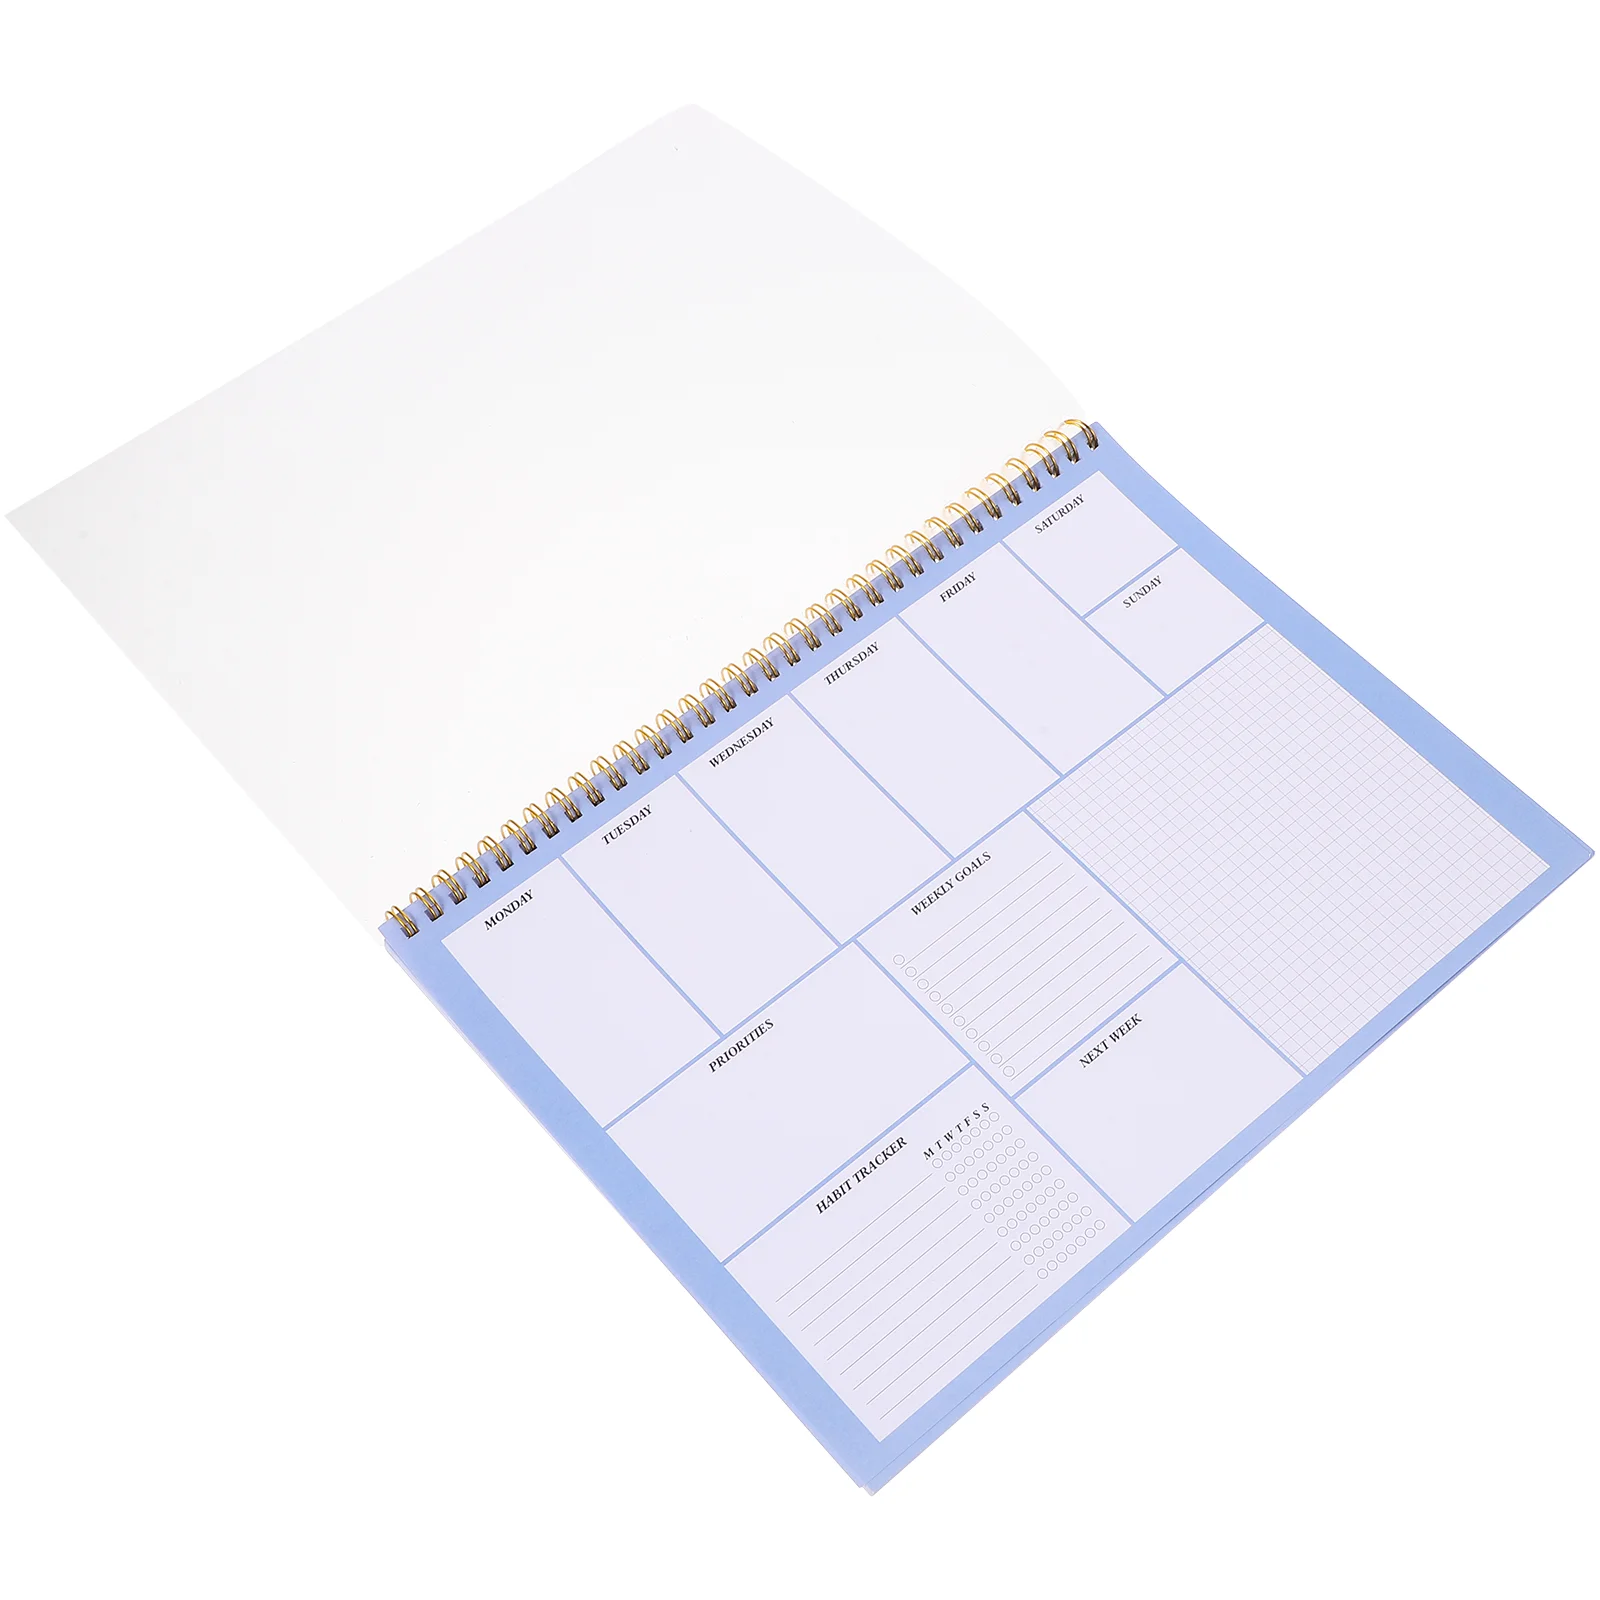 

Daily Planner Notepads Schedule Planner Notepad To Do List Tear Off Memo Writing Notebook Organizer Work Home Office School